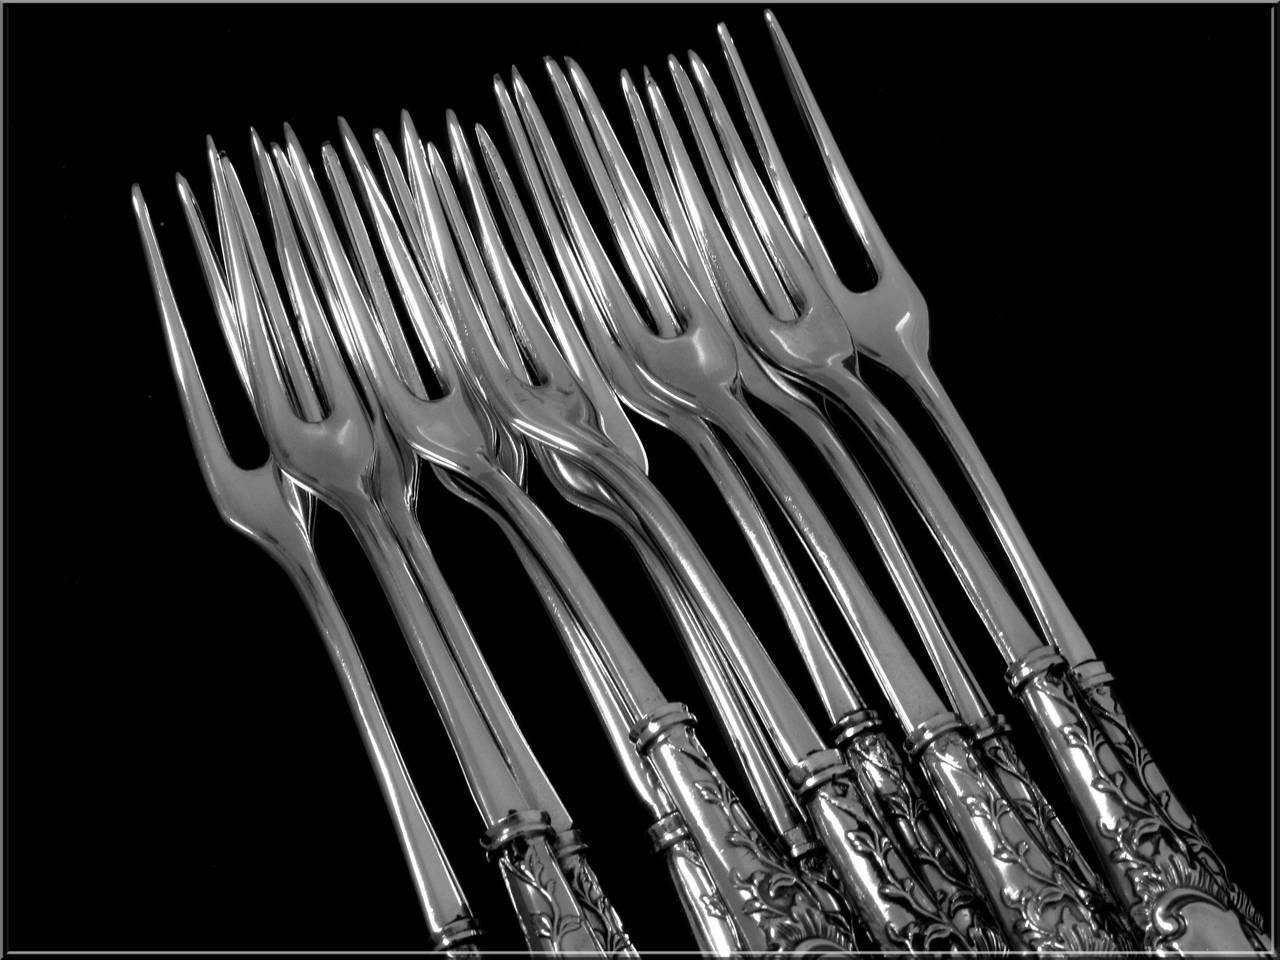 Late 19th Century Gabert French Sterling Silver Shellfish Snails Forks Set of 12 Pieces Rococo